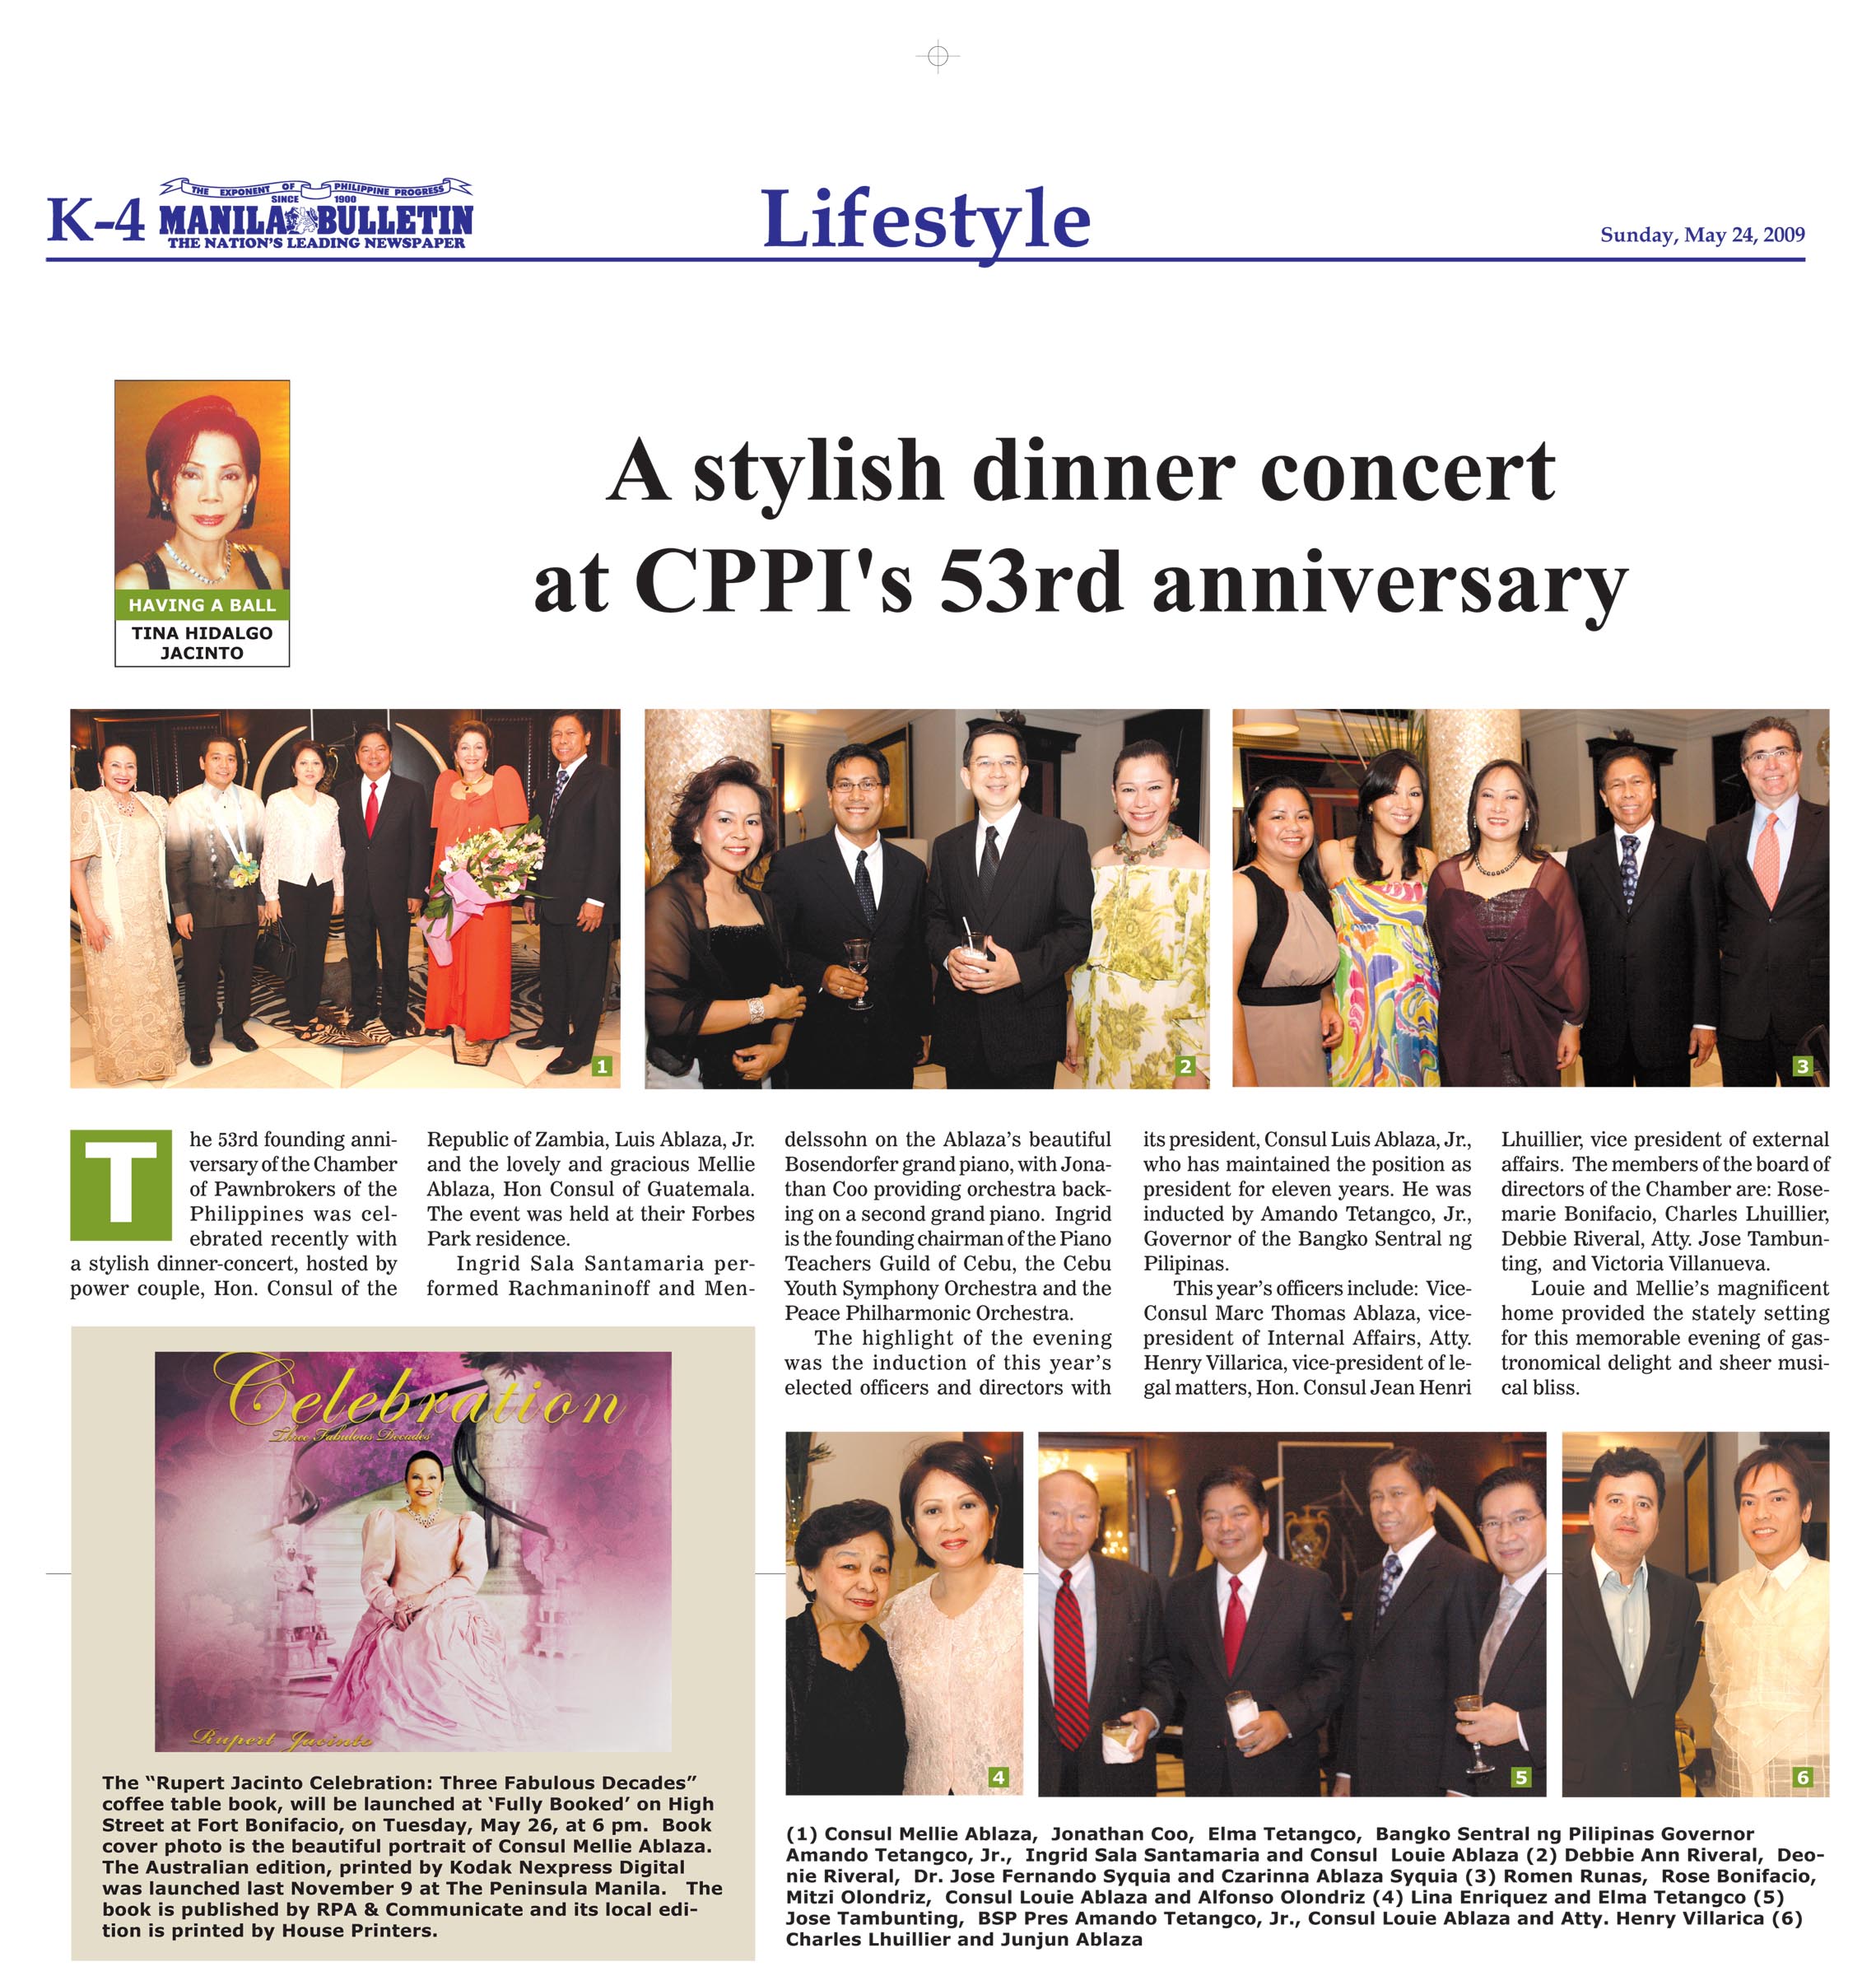 A Stylish dinner concert at CPPI 53rd anniversary